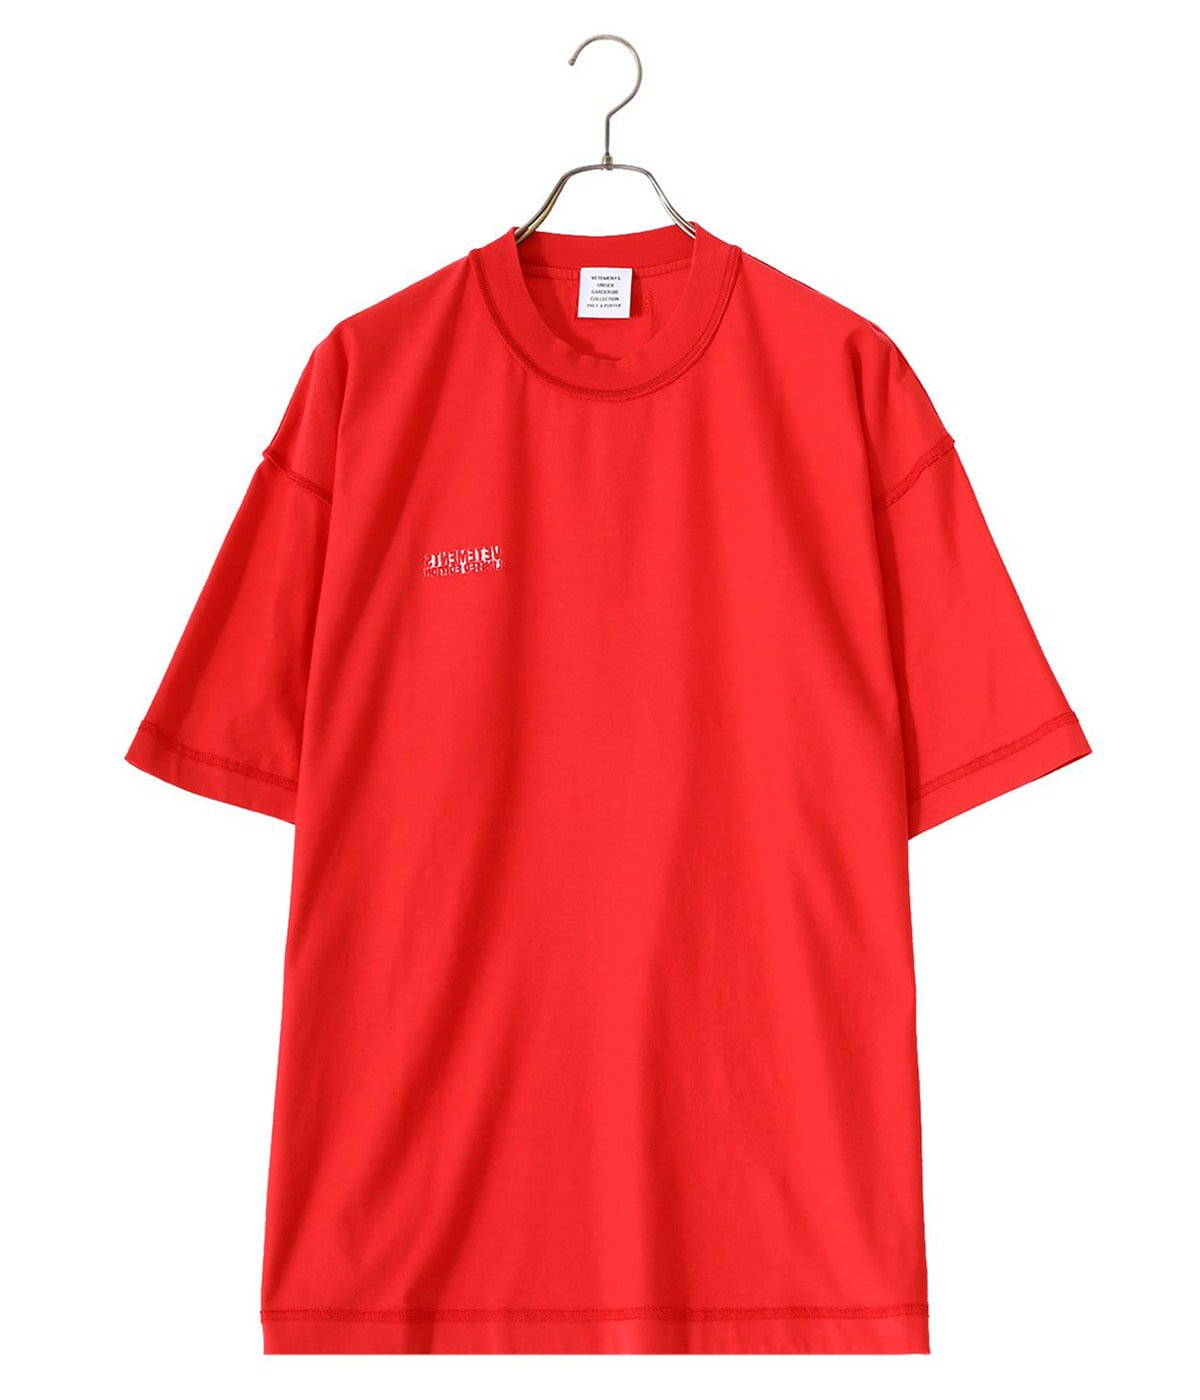 Vetements 18ss Inside out Tシャツ 確実正規品